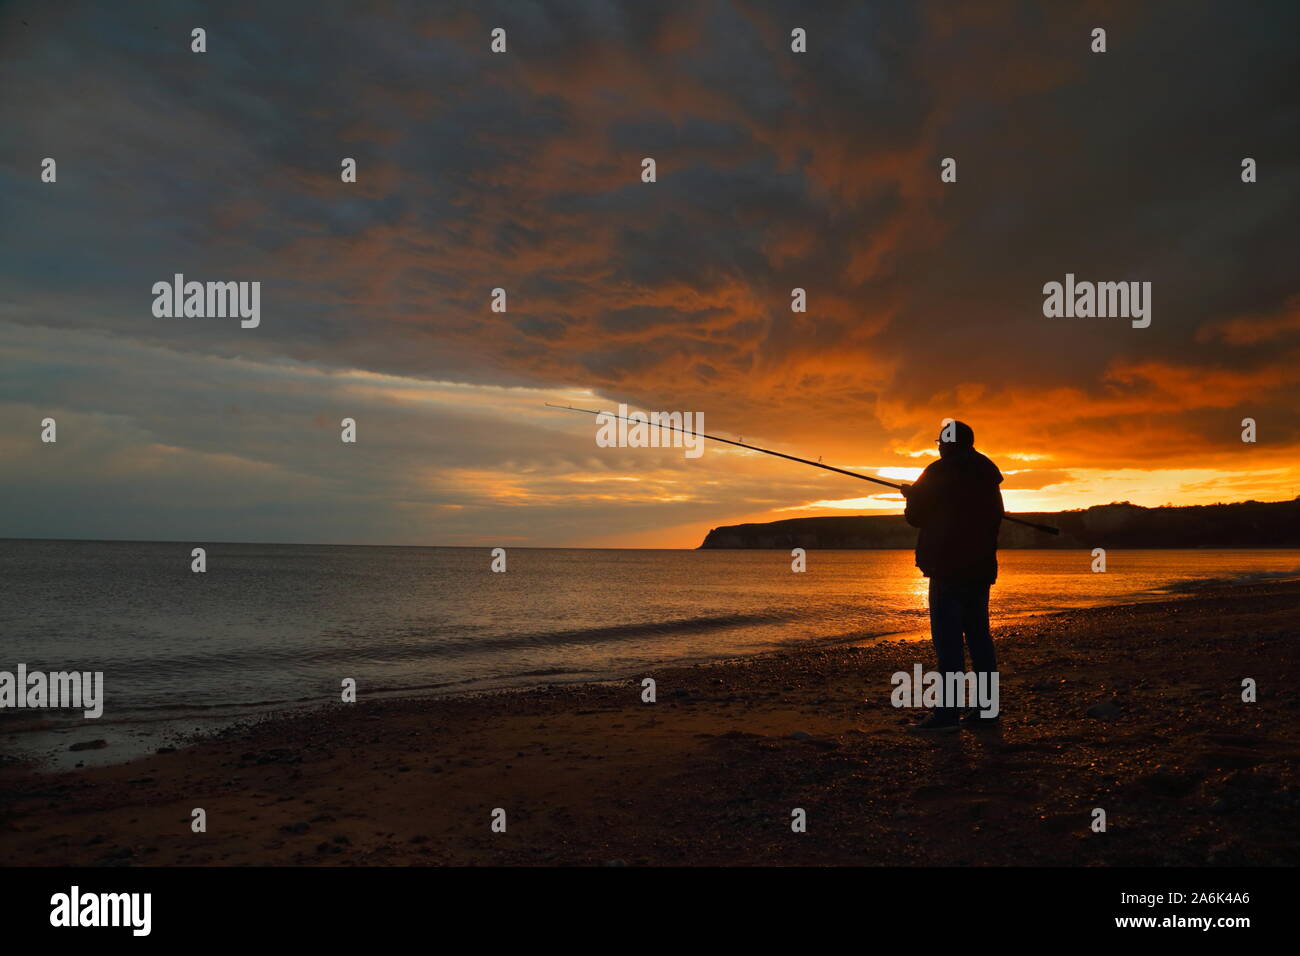 Silhouette of fisherman on the Jurassic Coast at sunset Stock Photo